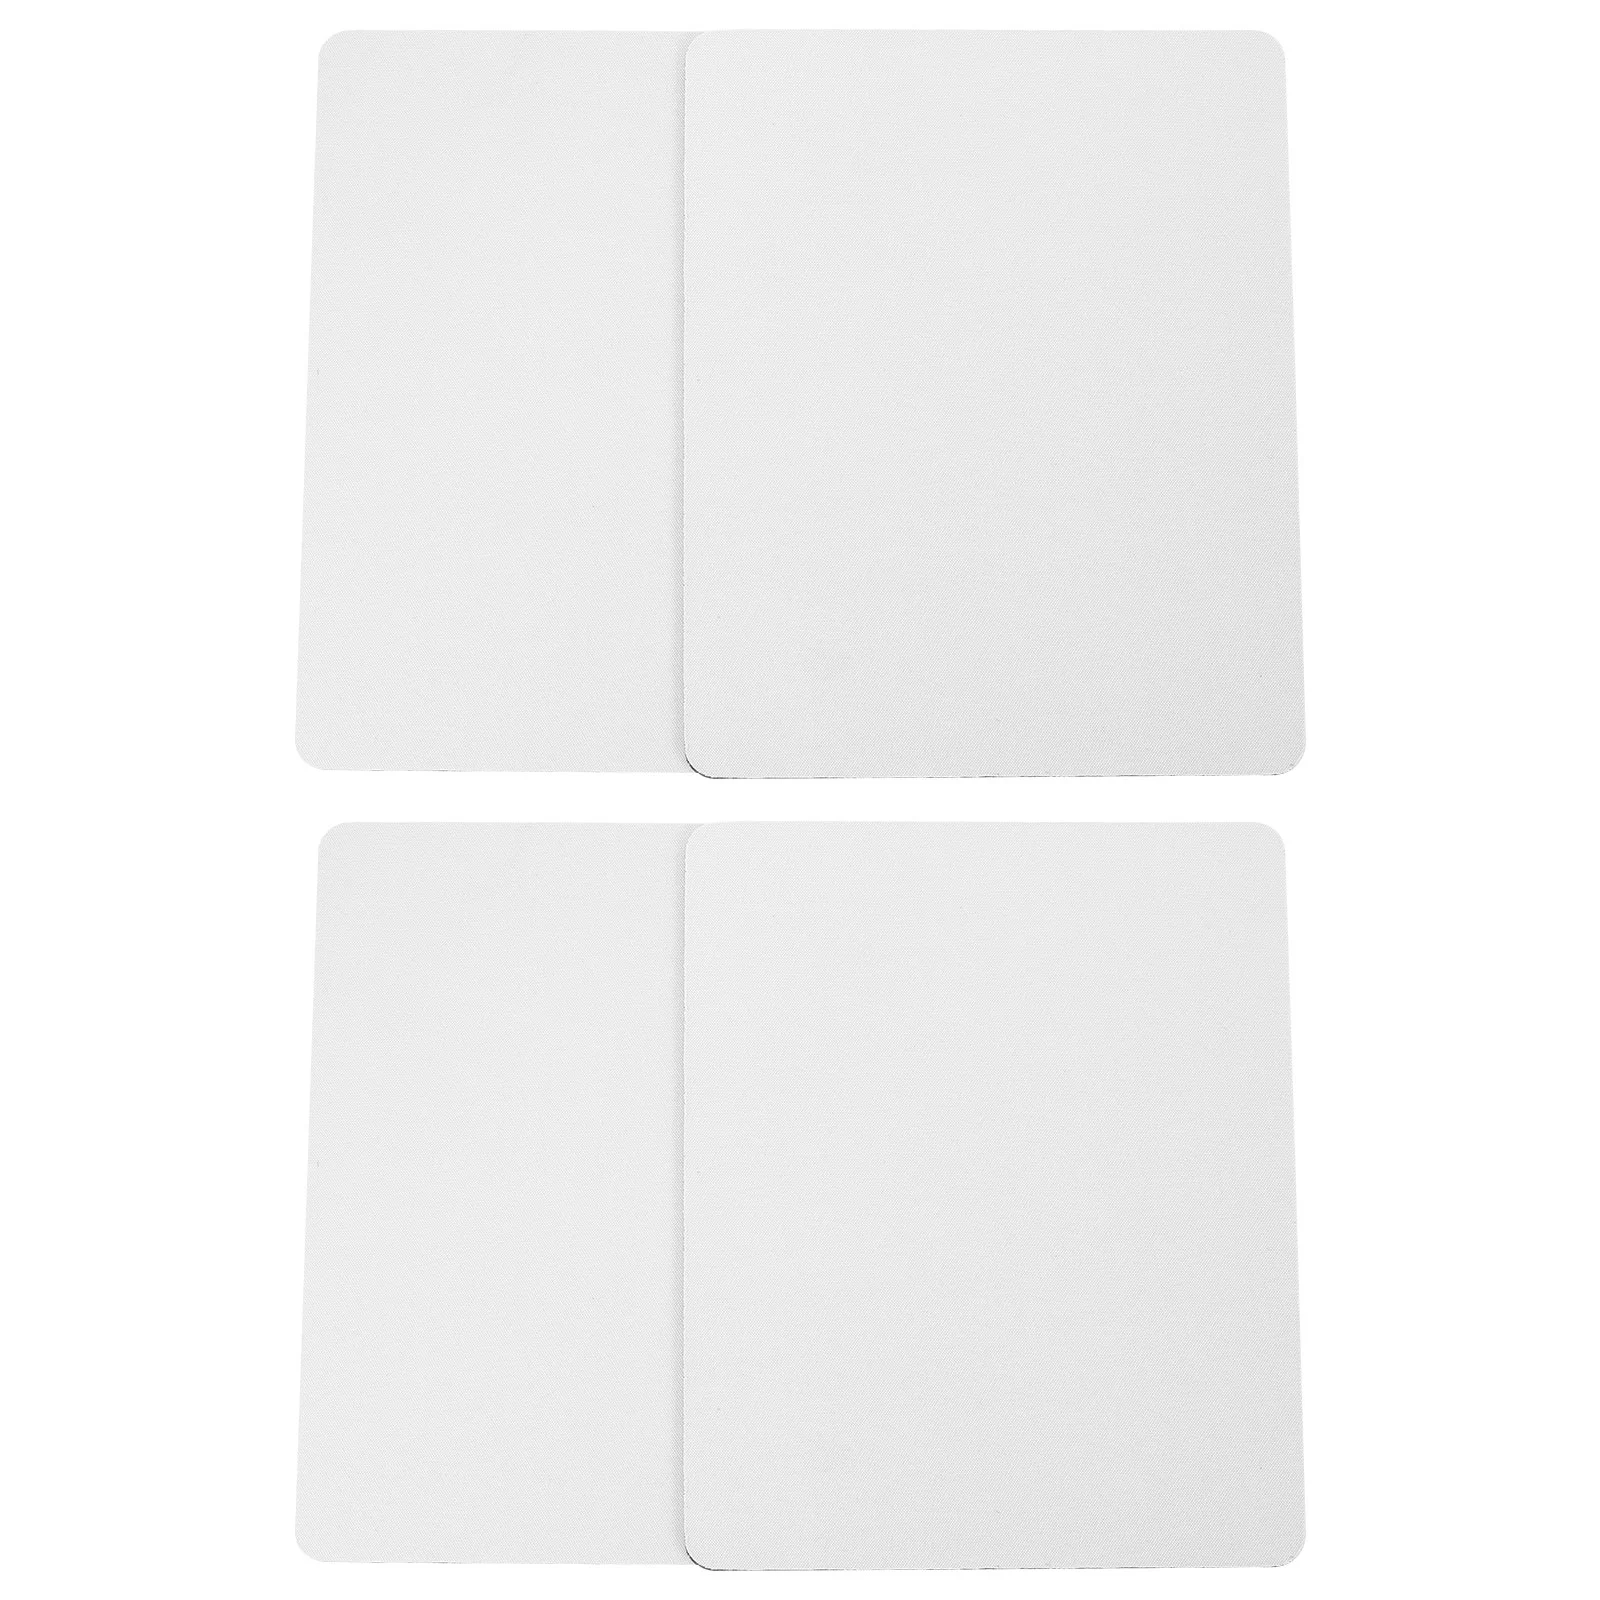 

Sublimation Blank Articles Mouse Pads Desk Computer Gaming Modern Blanks Mousepad